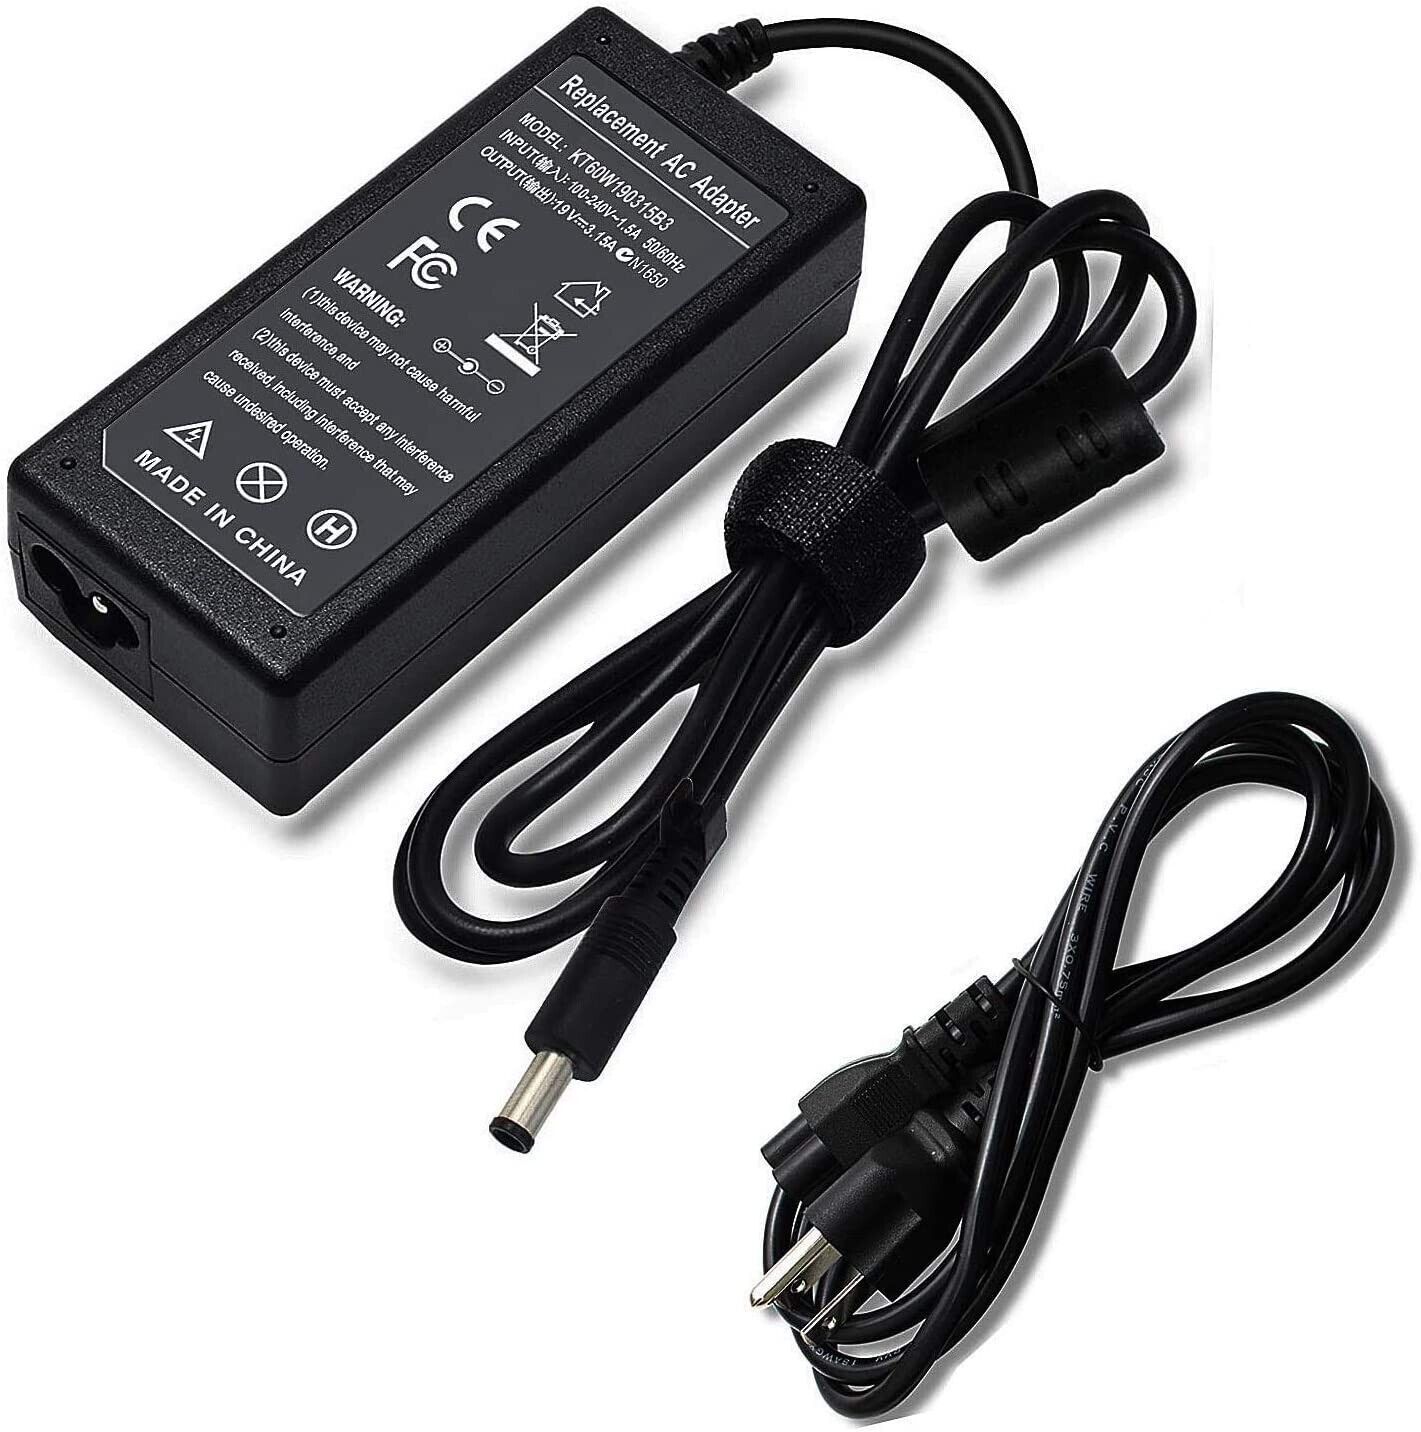 AC Adapter Charger For Samsung NP-R480L, NP-R50, NP-R503, NP-R505